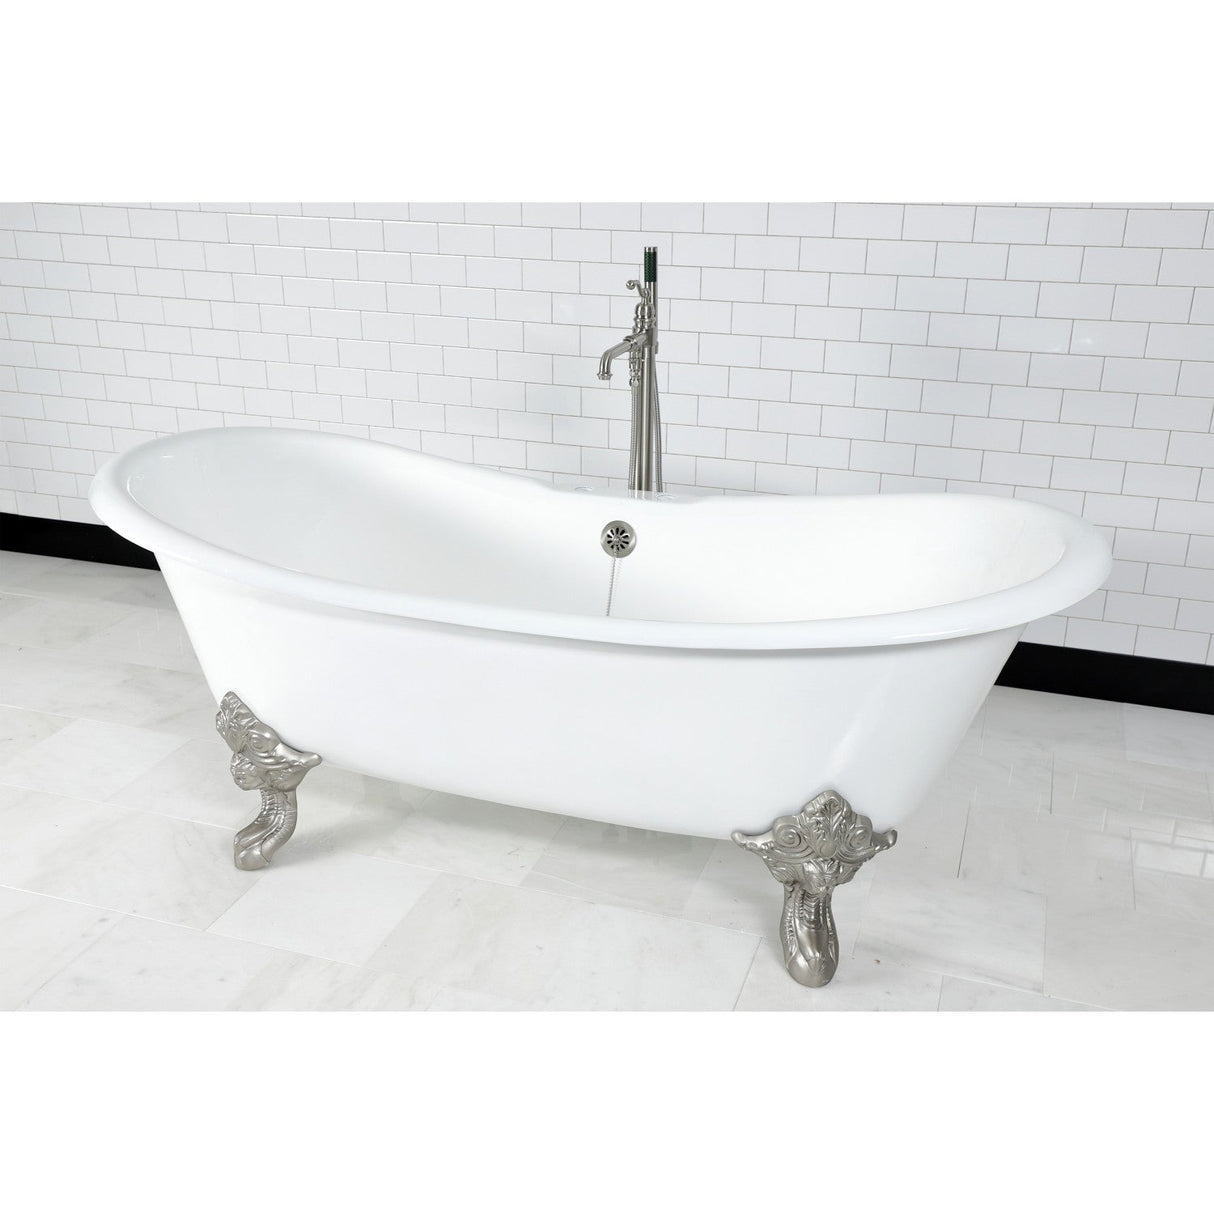 Aqua Eden VCTNDS7231NL8 72-Inch Cast Iron Double Slipper Clawfoot Tub (No Faucet Drillings), White/Brushed Nickel